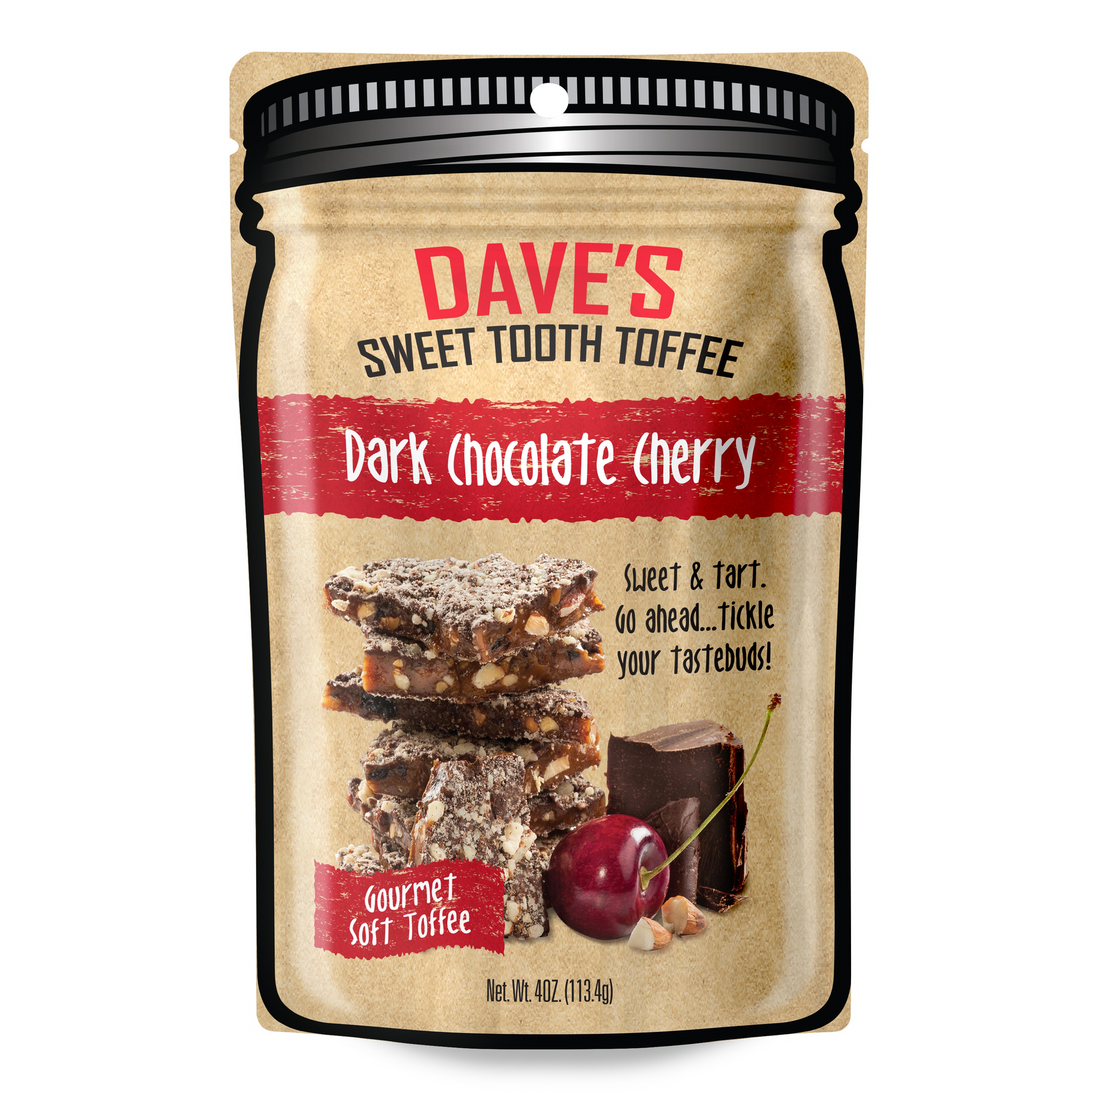 Dave's Sweet Tooth Toffee - Dark Chocolate Cherry